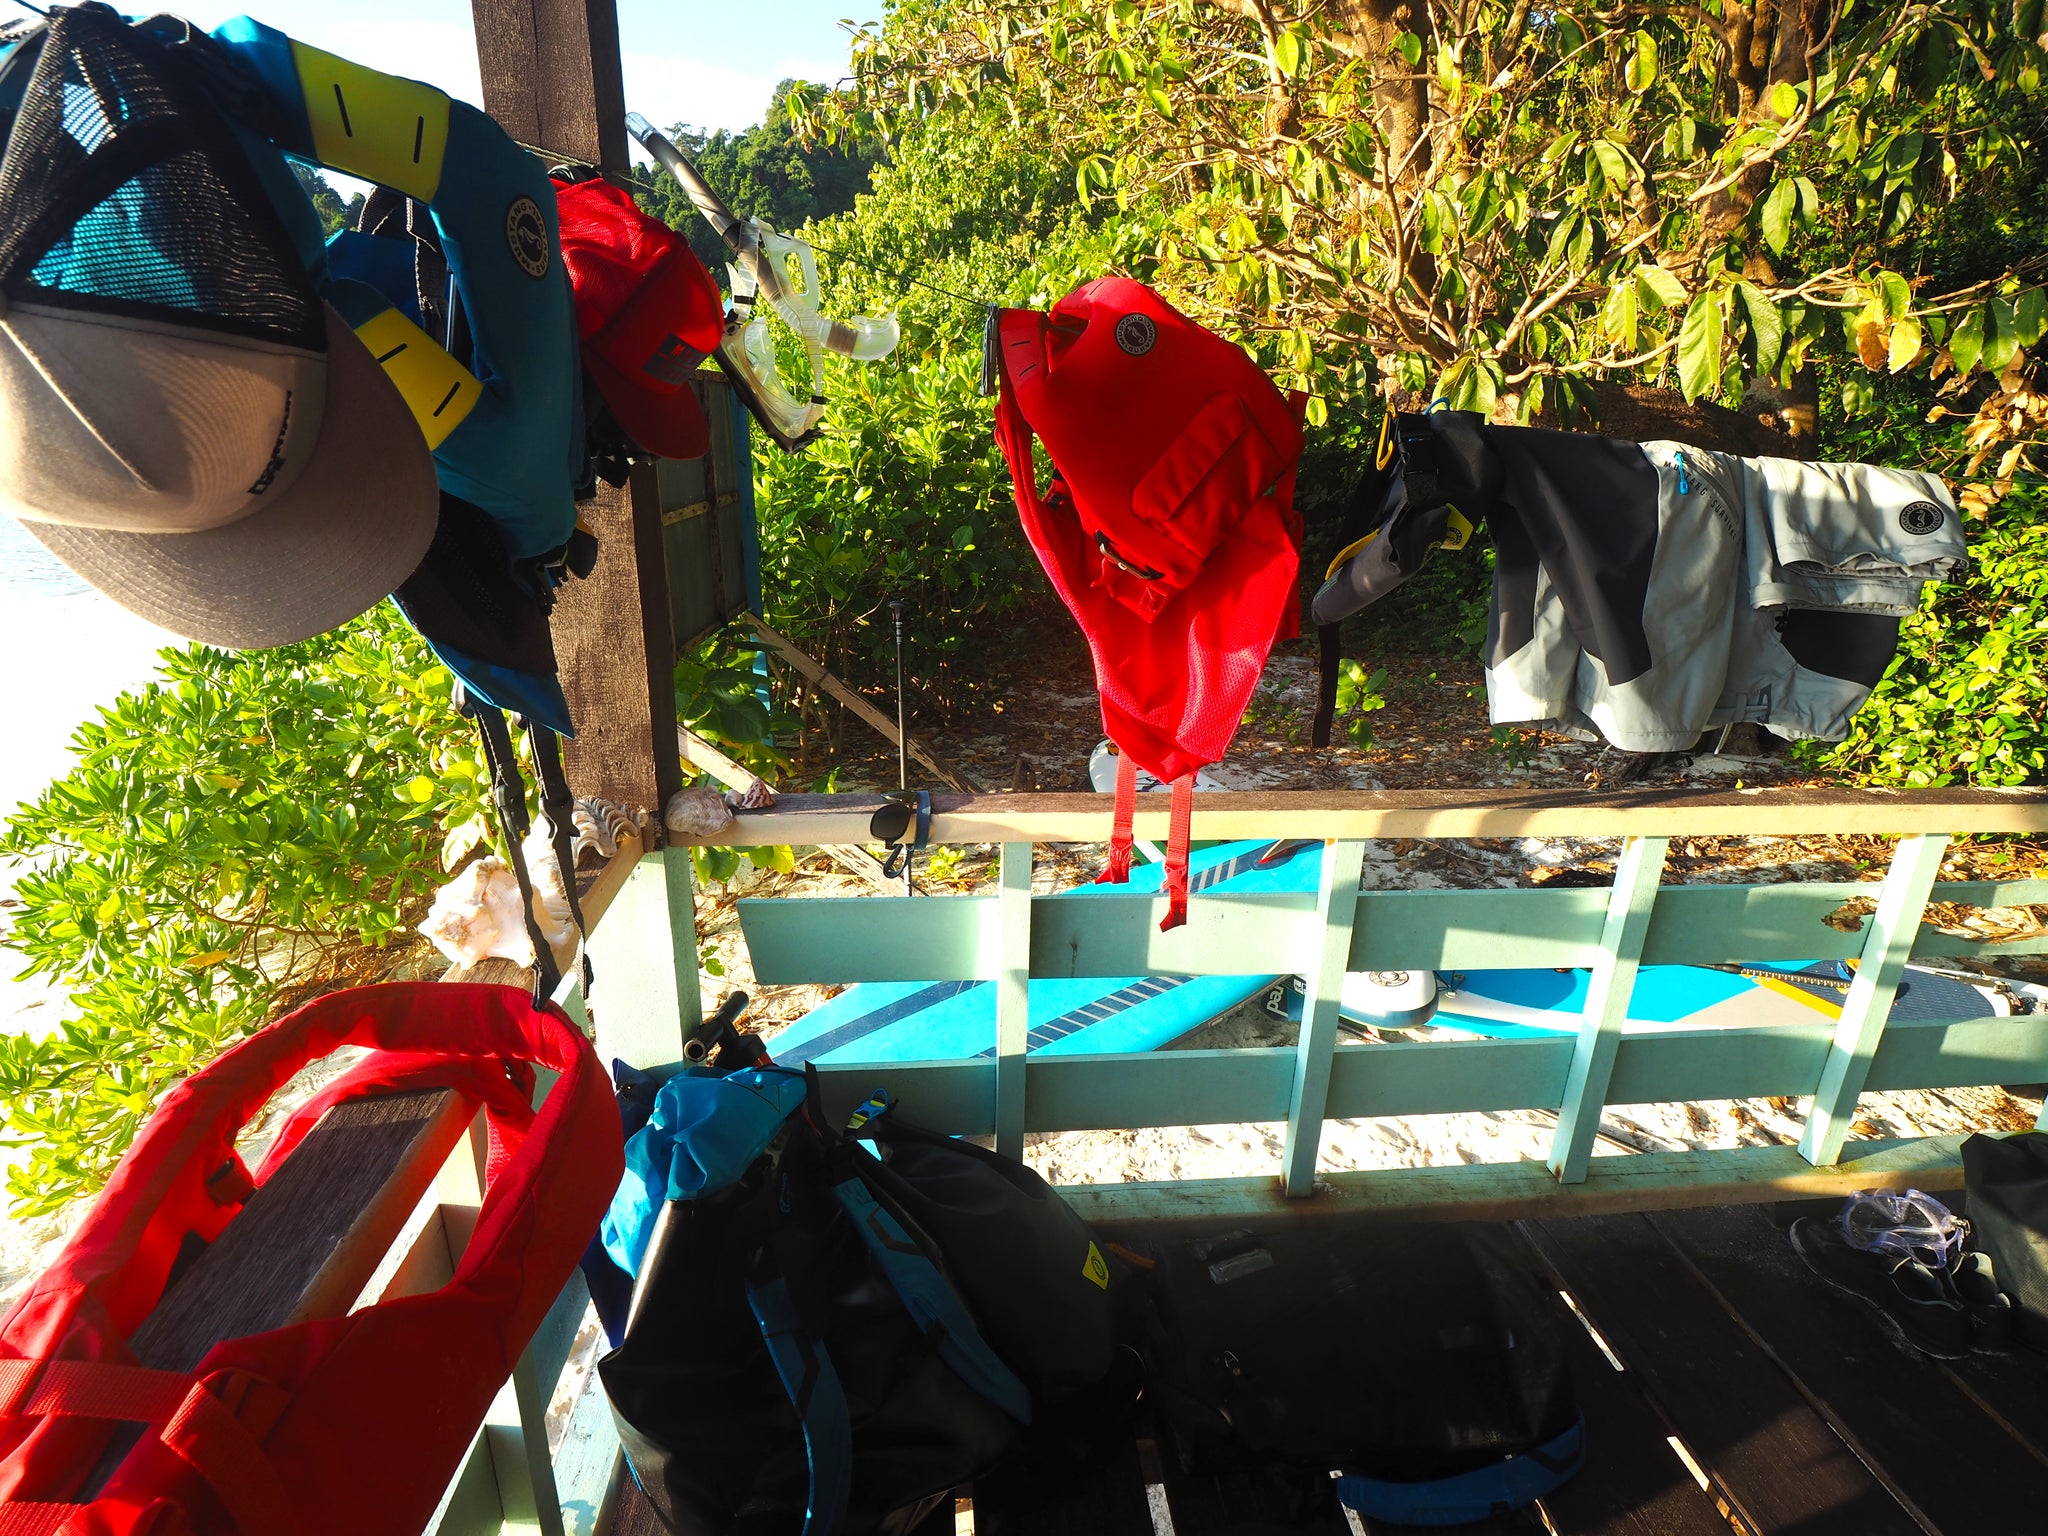 drying clothes and a life jacket on a line